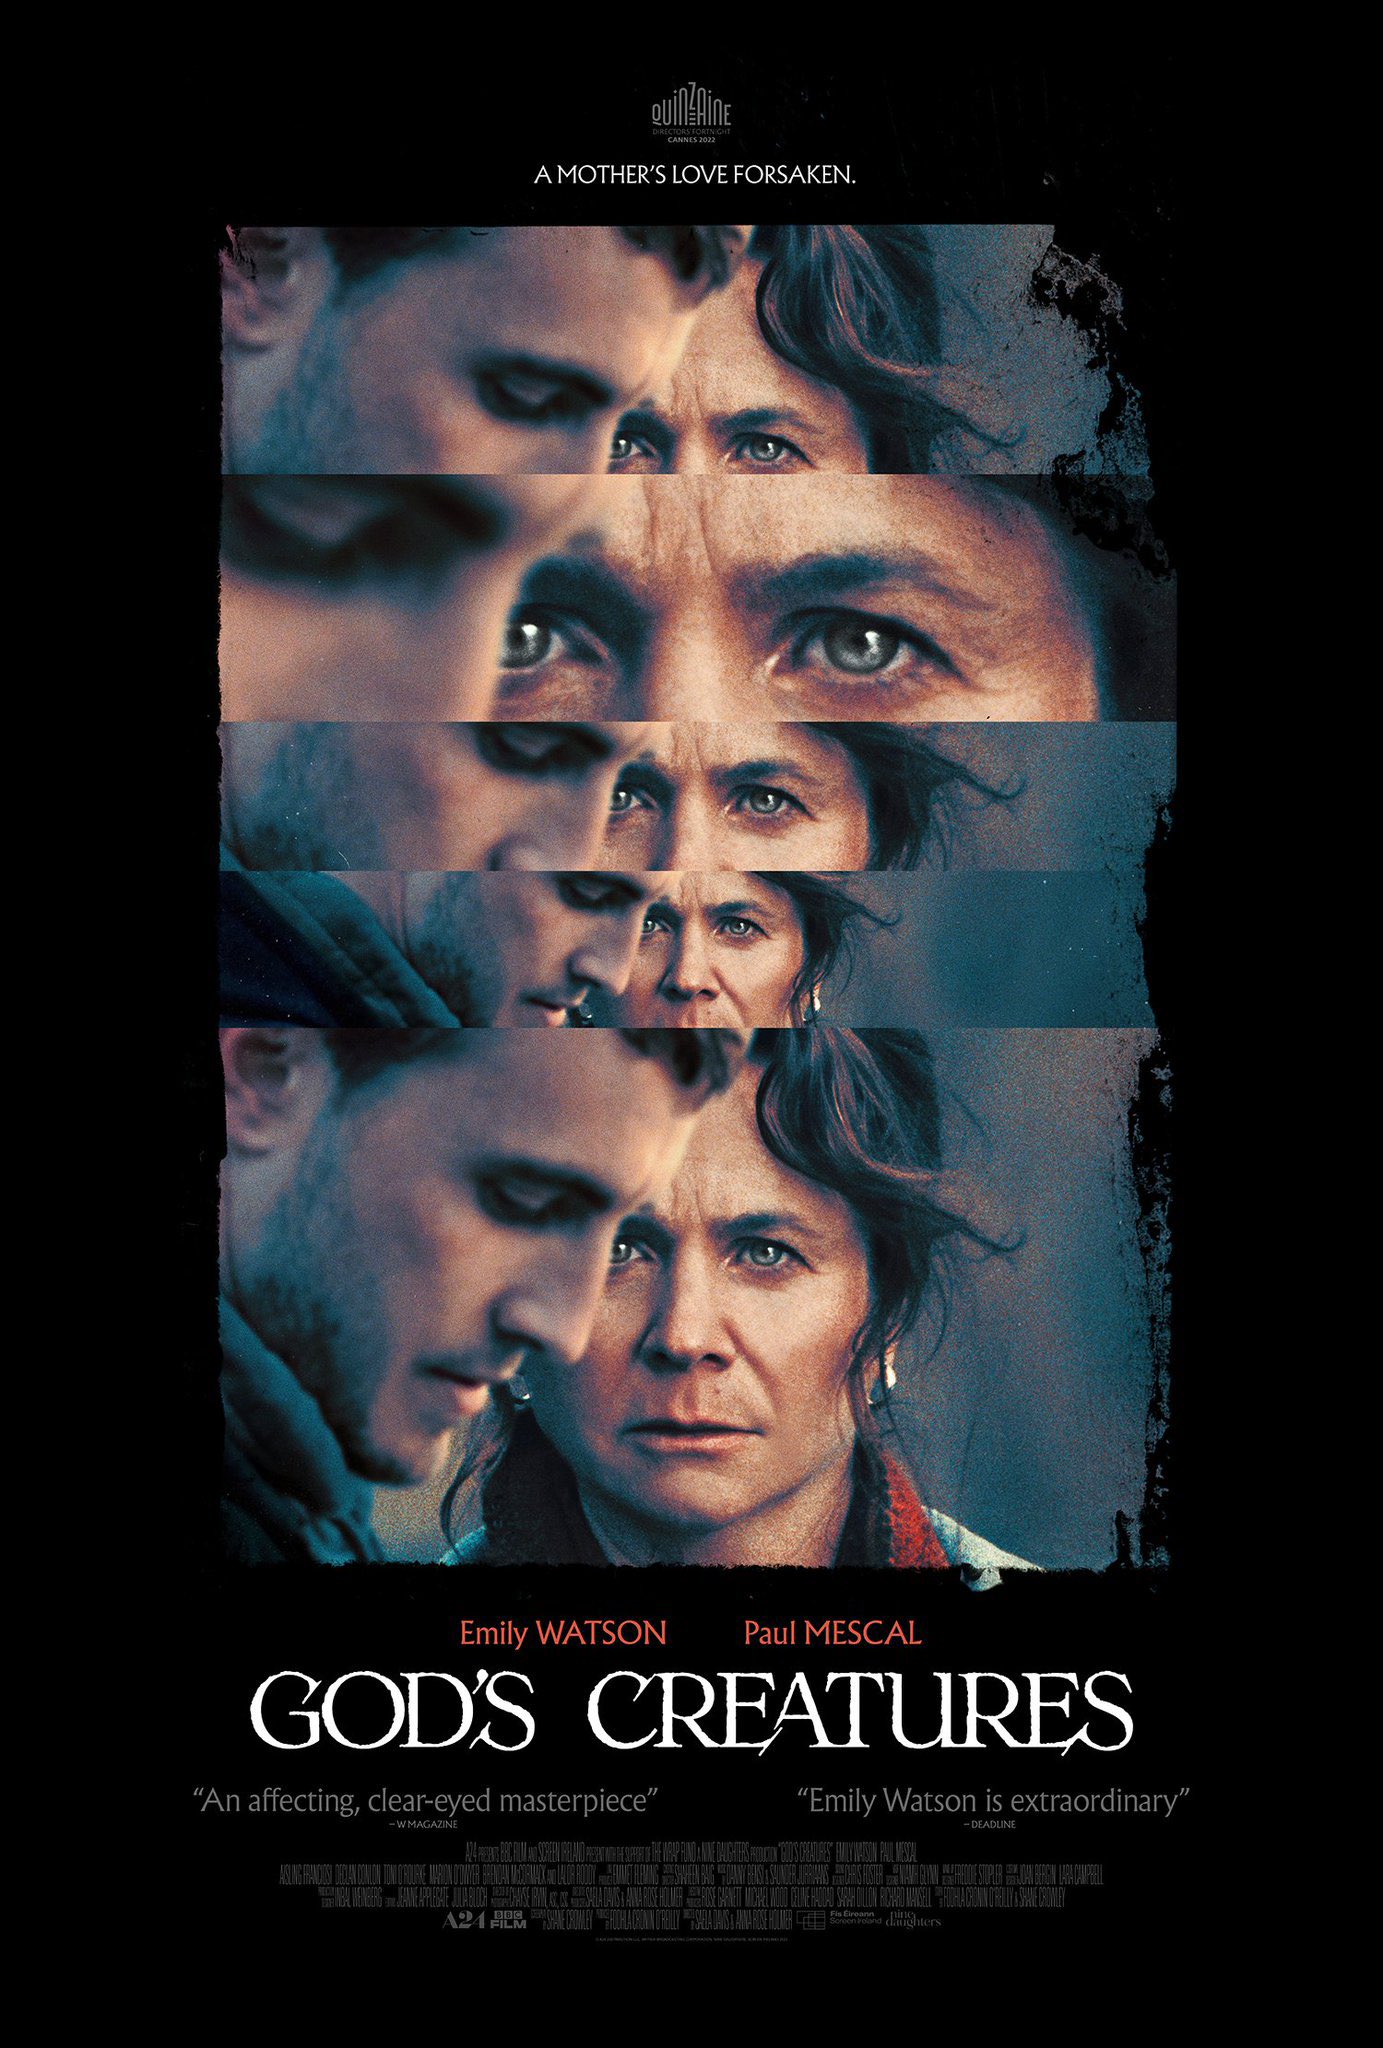 God’s Creatures To Premiere In Directors’ Fortnight At The Cannes Film Festival 2022